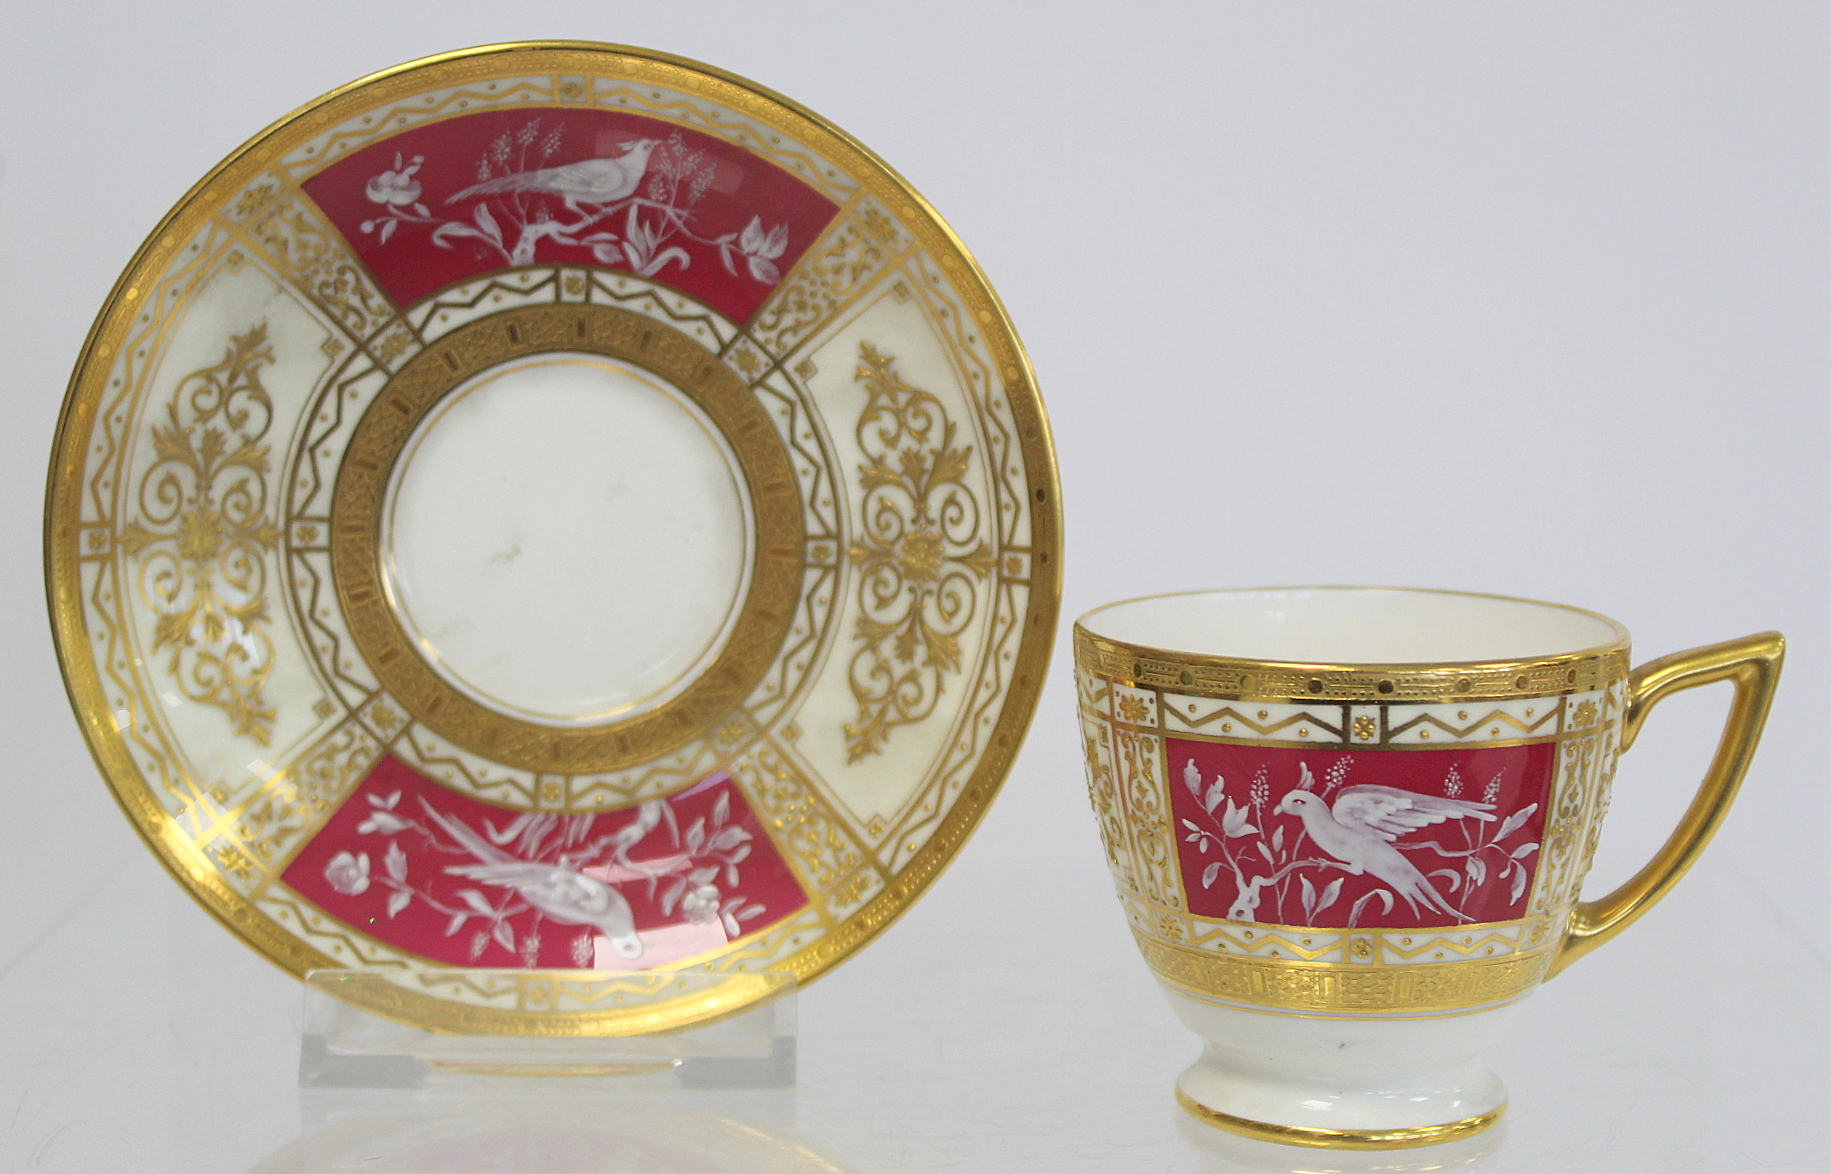 Minton bone china pate sur pate cabinet cup and saucer with cerise and white panels of exotic - Image 10 of 26